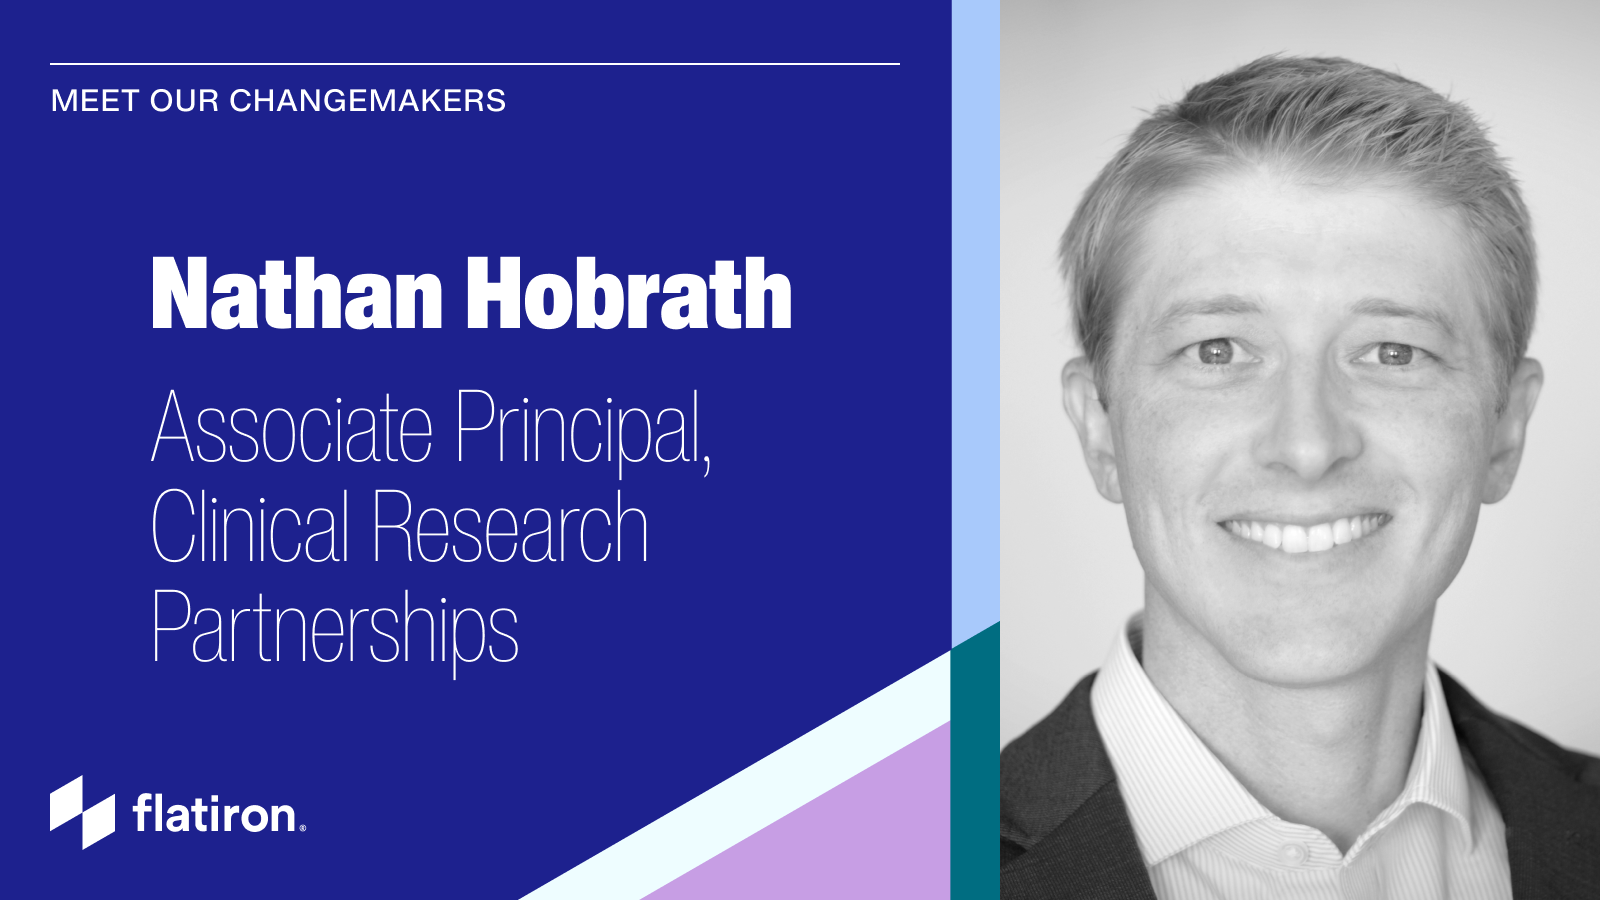 Meet our Changemakers: Nathan Hobrath, Associate Principal of Clinical Research Partnerships